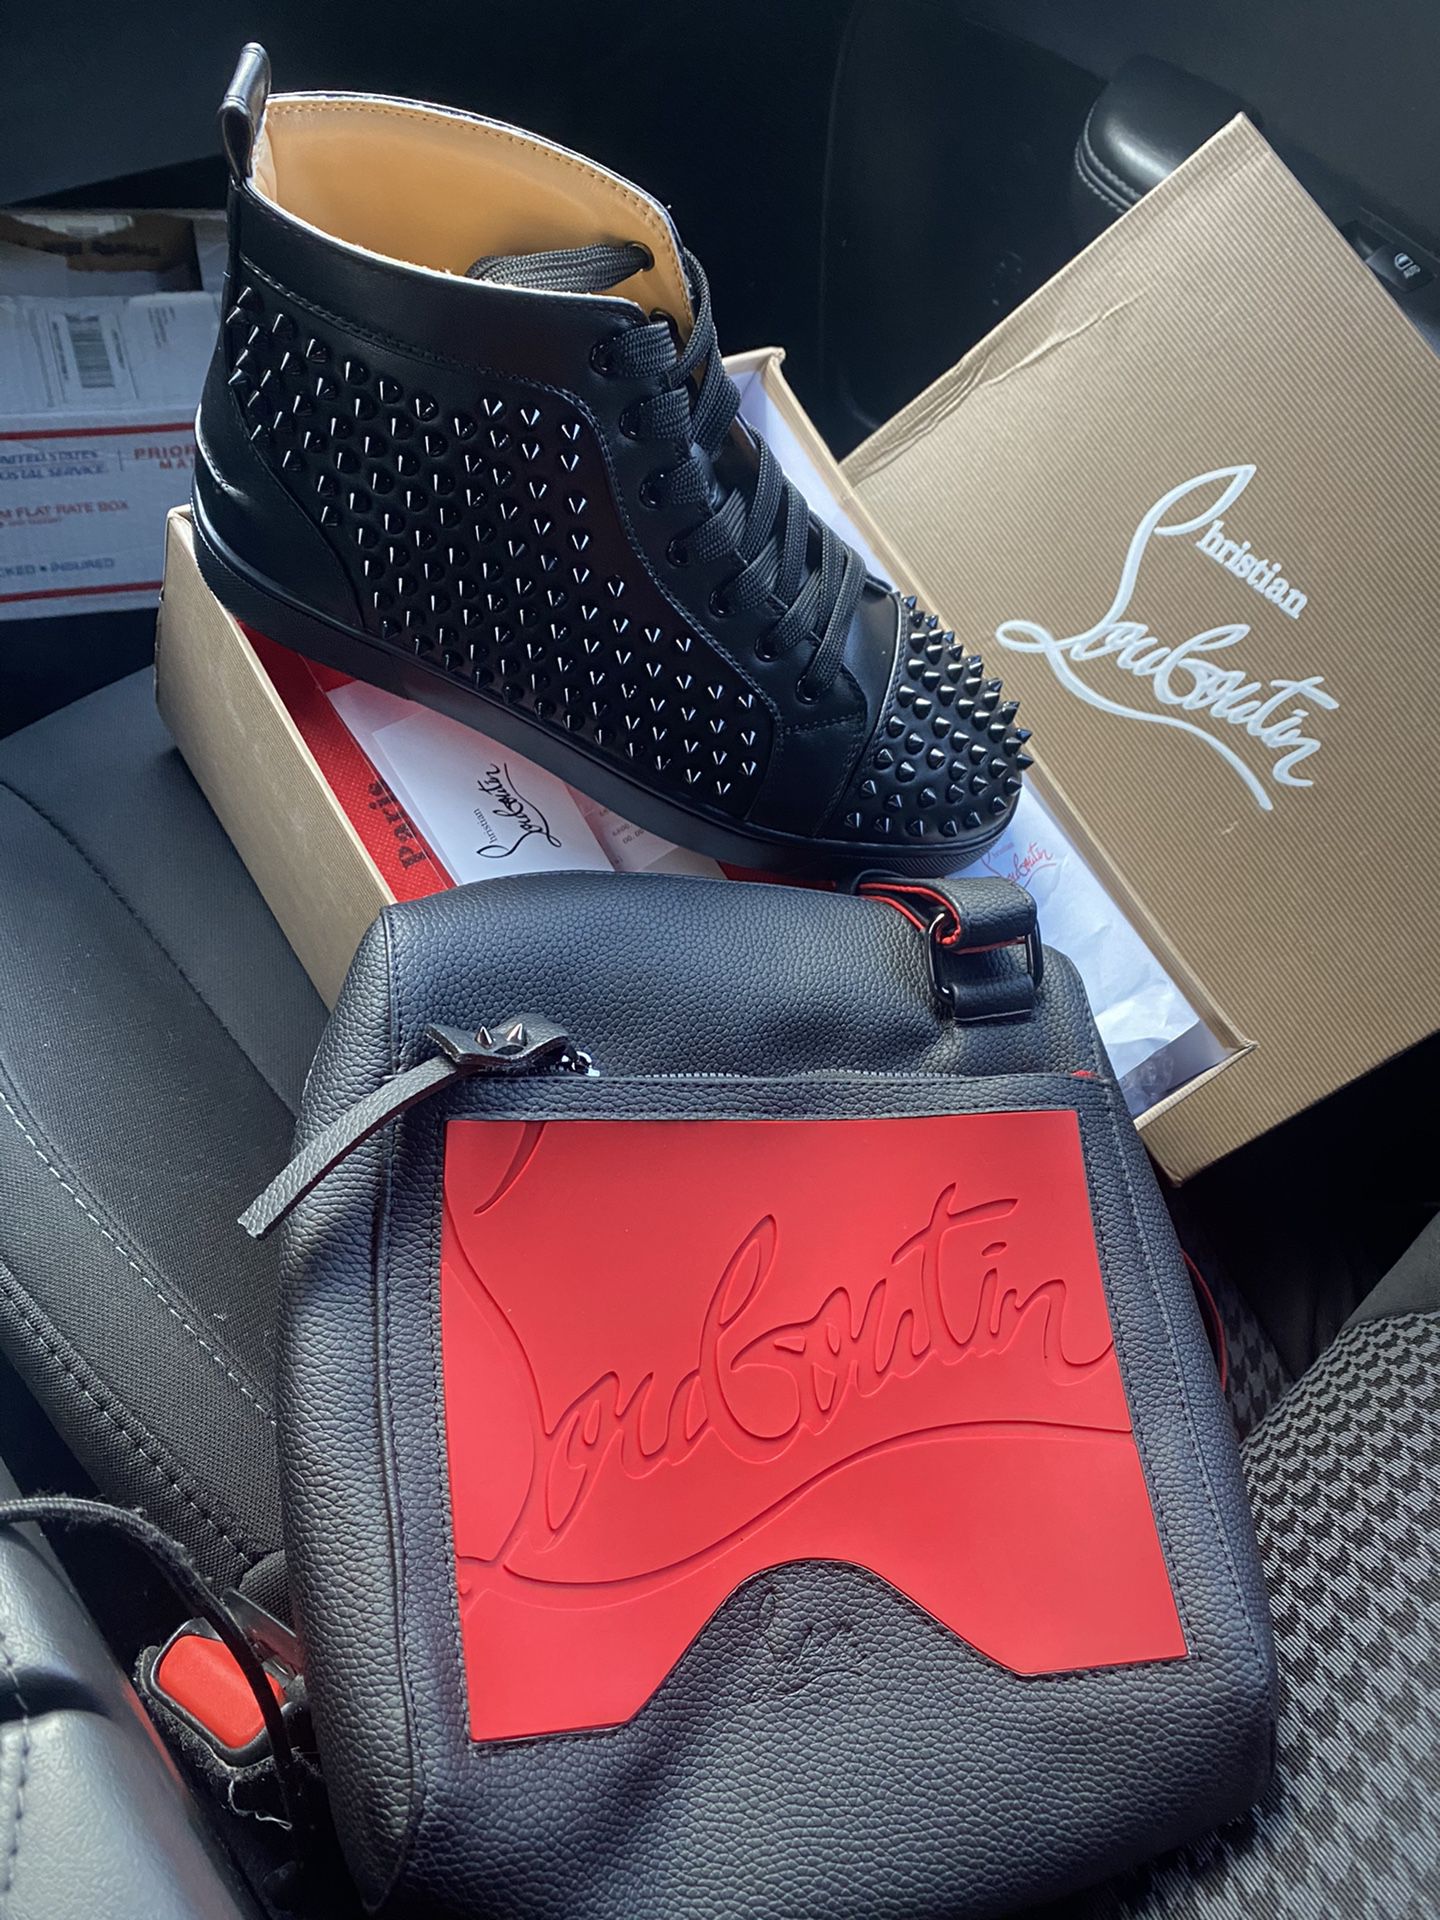 Christian Louboutin Bag for Sale in Houston, TX - OfferUp